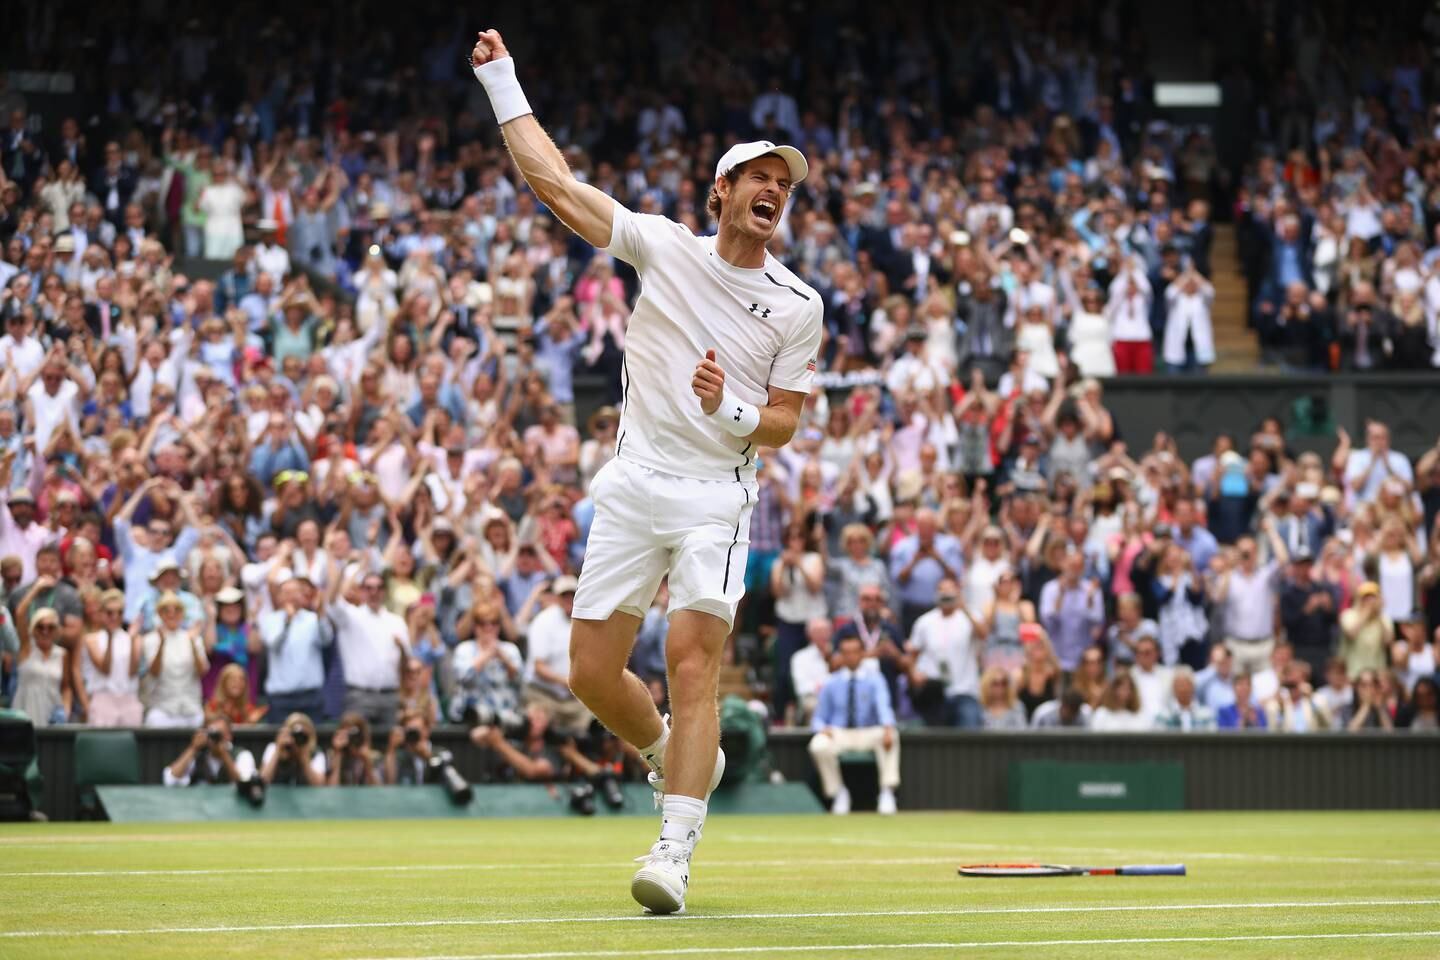 Andy Murray celebrates winning the Men's Singles Final at Wimbledon in 2016. Getty Images